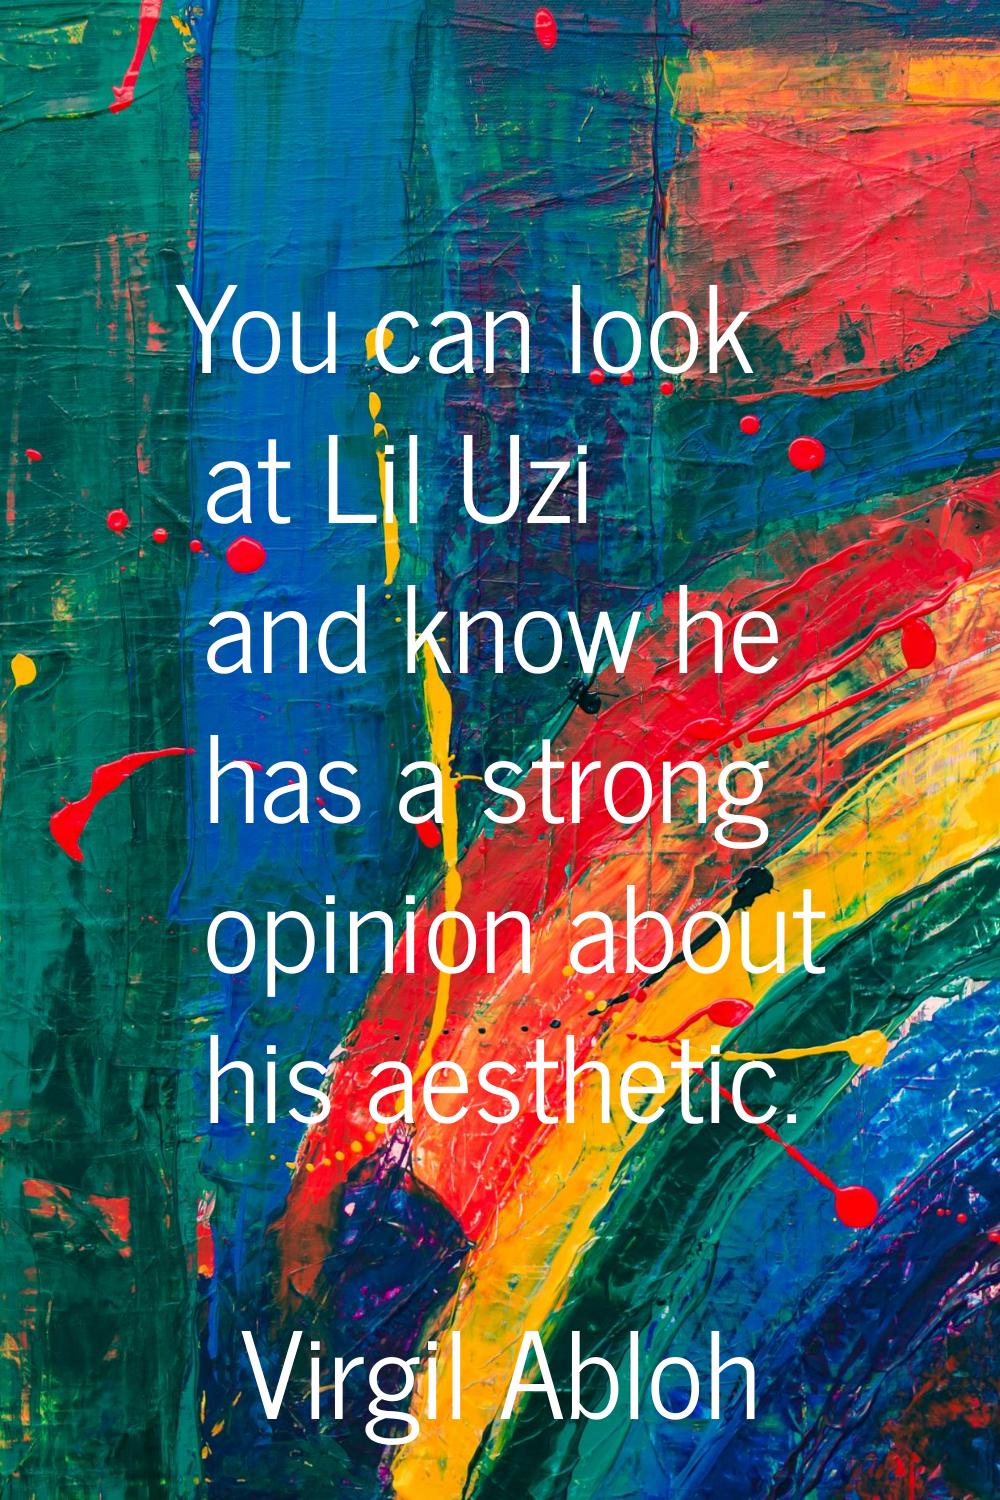 You can look at Lil Uzi and know he has a strong opinion about his aesthetic.